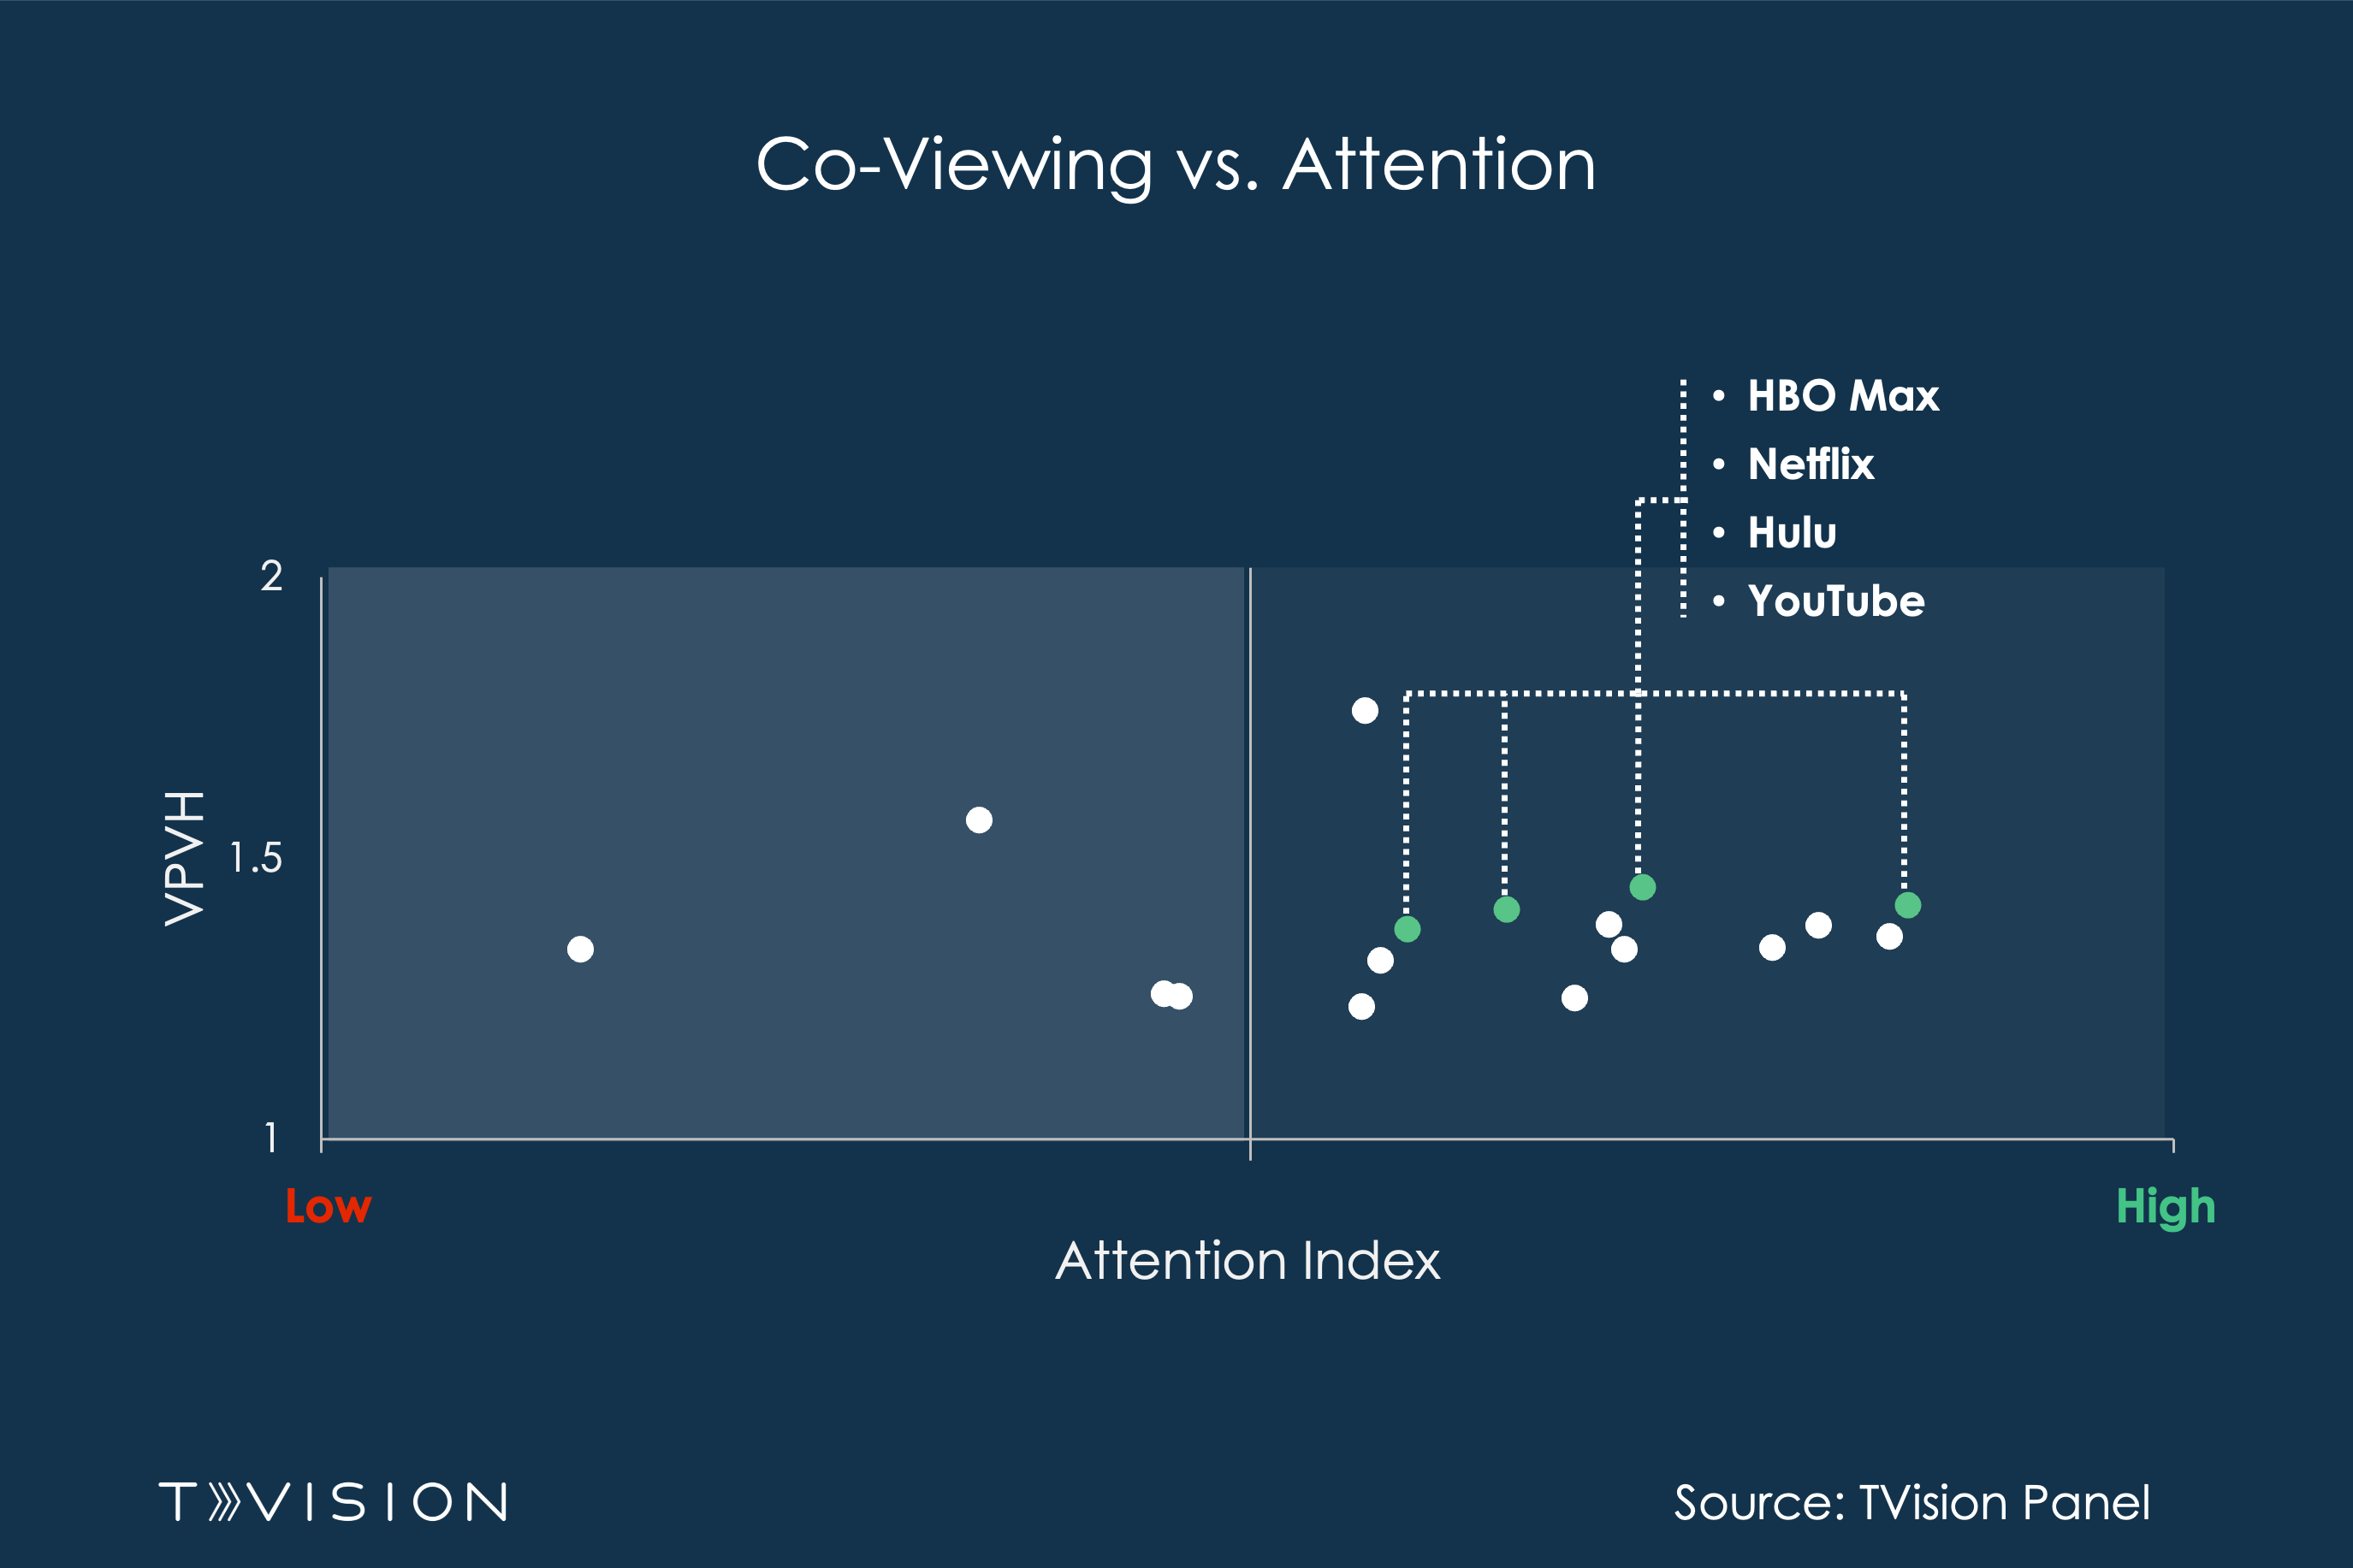 Co-Viewing vs. Attention